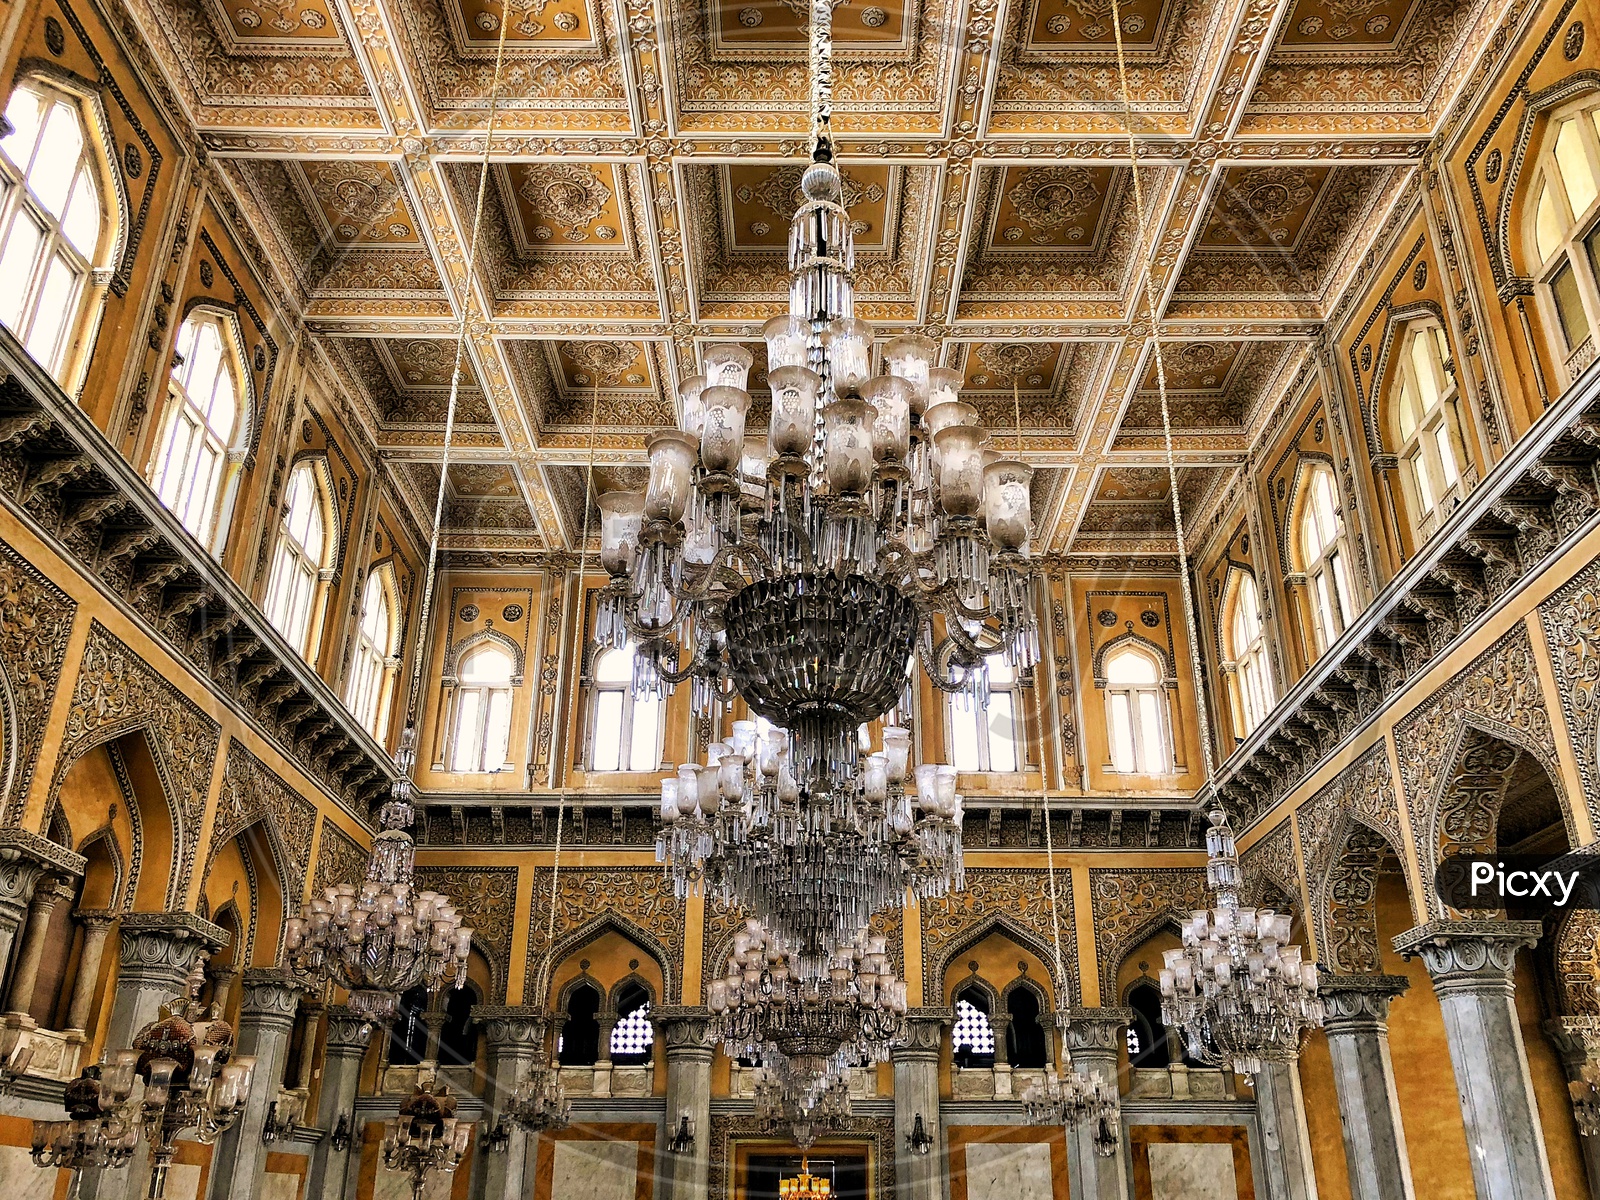 The Royal Chandelier!